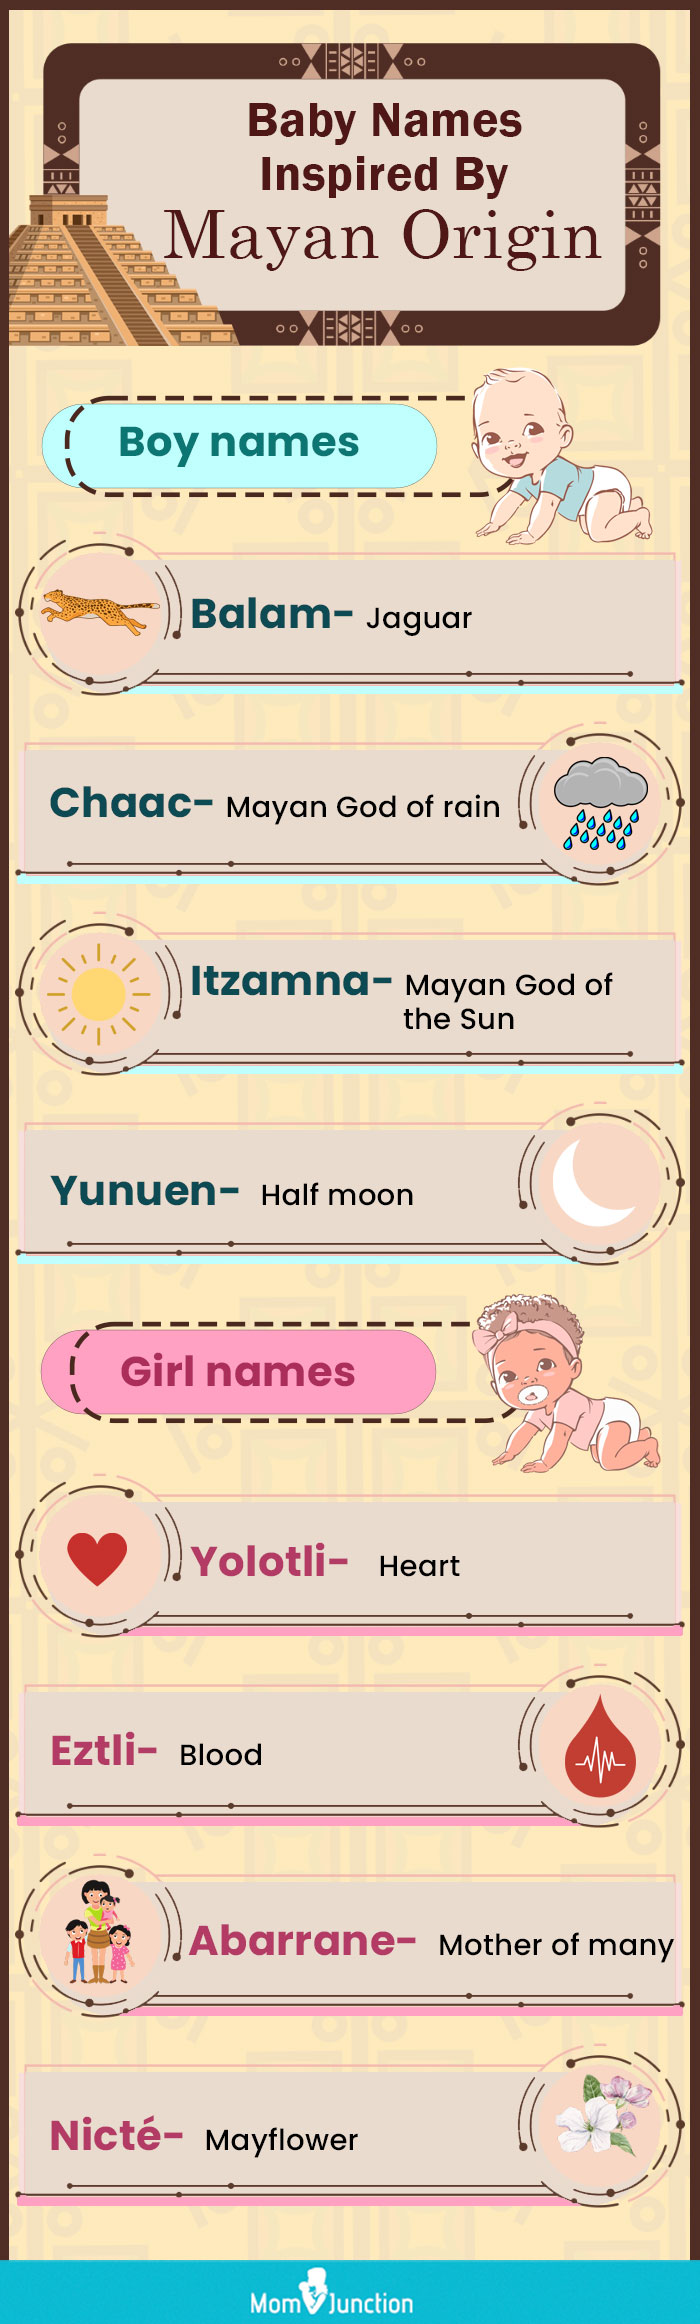 baby names inspired by mayan origin (infographic)